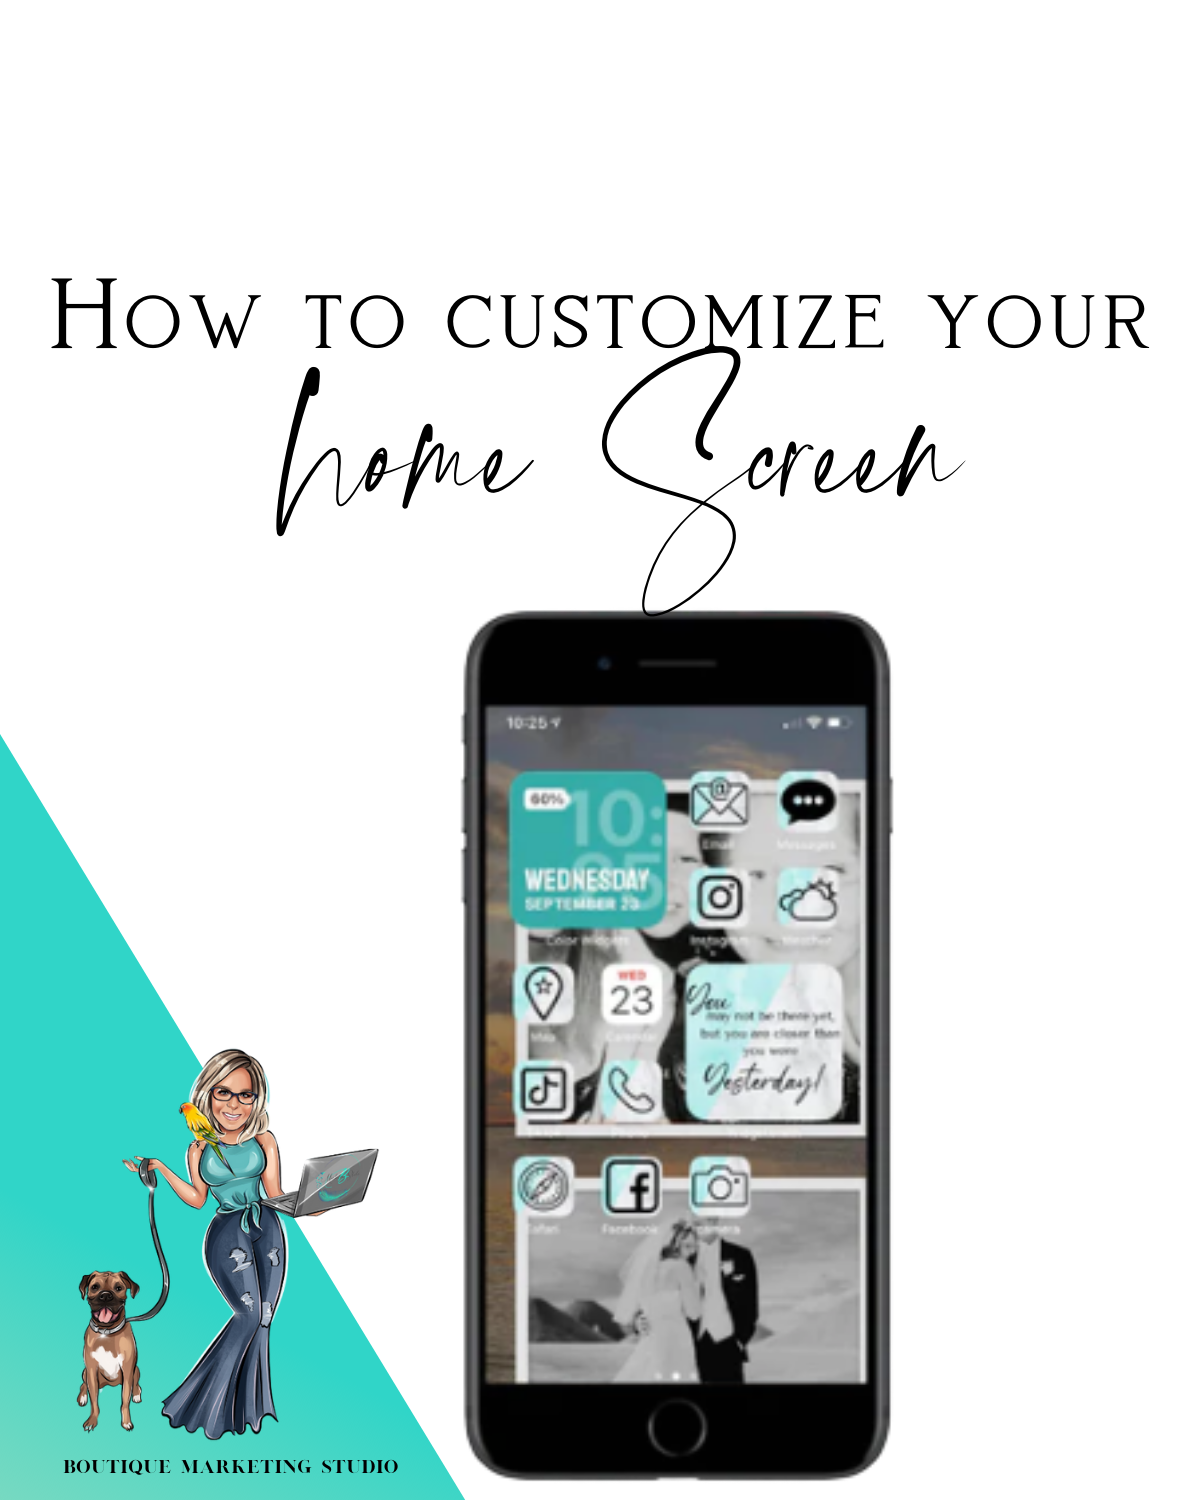 ((ℍ𝕠𝕨 𝕋𝕠 )) Customize Instagram & Your Cell Phone with Highlighted Covers